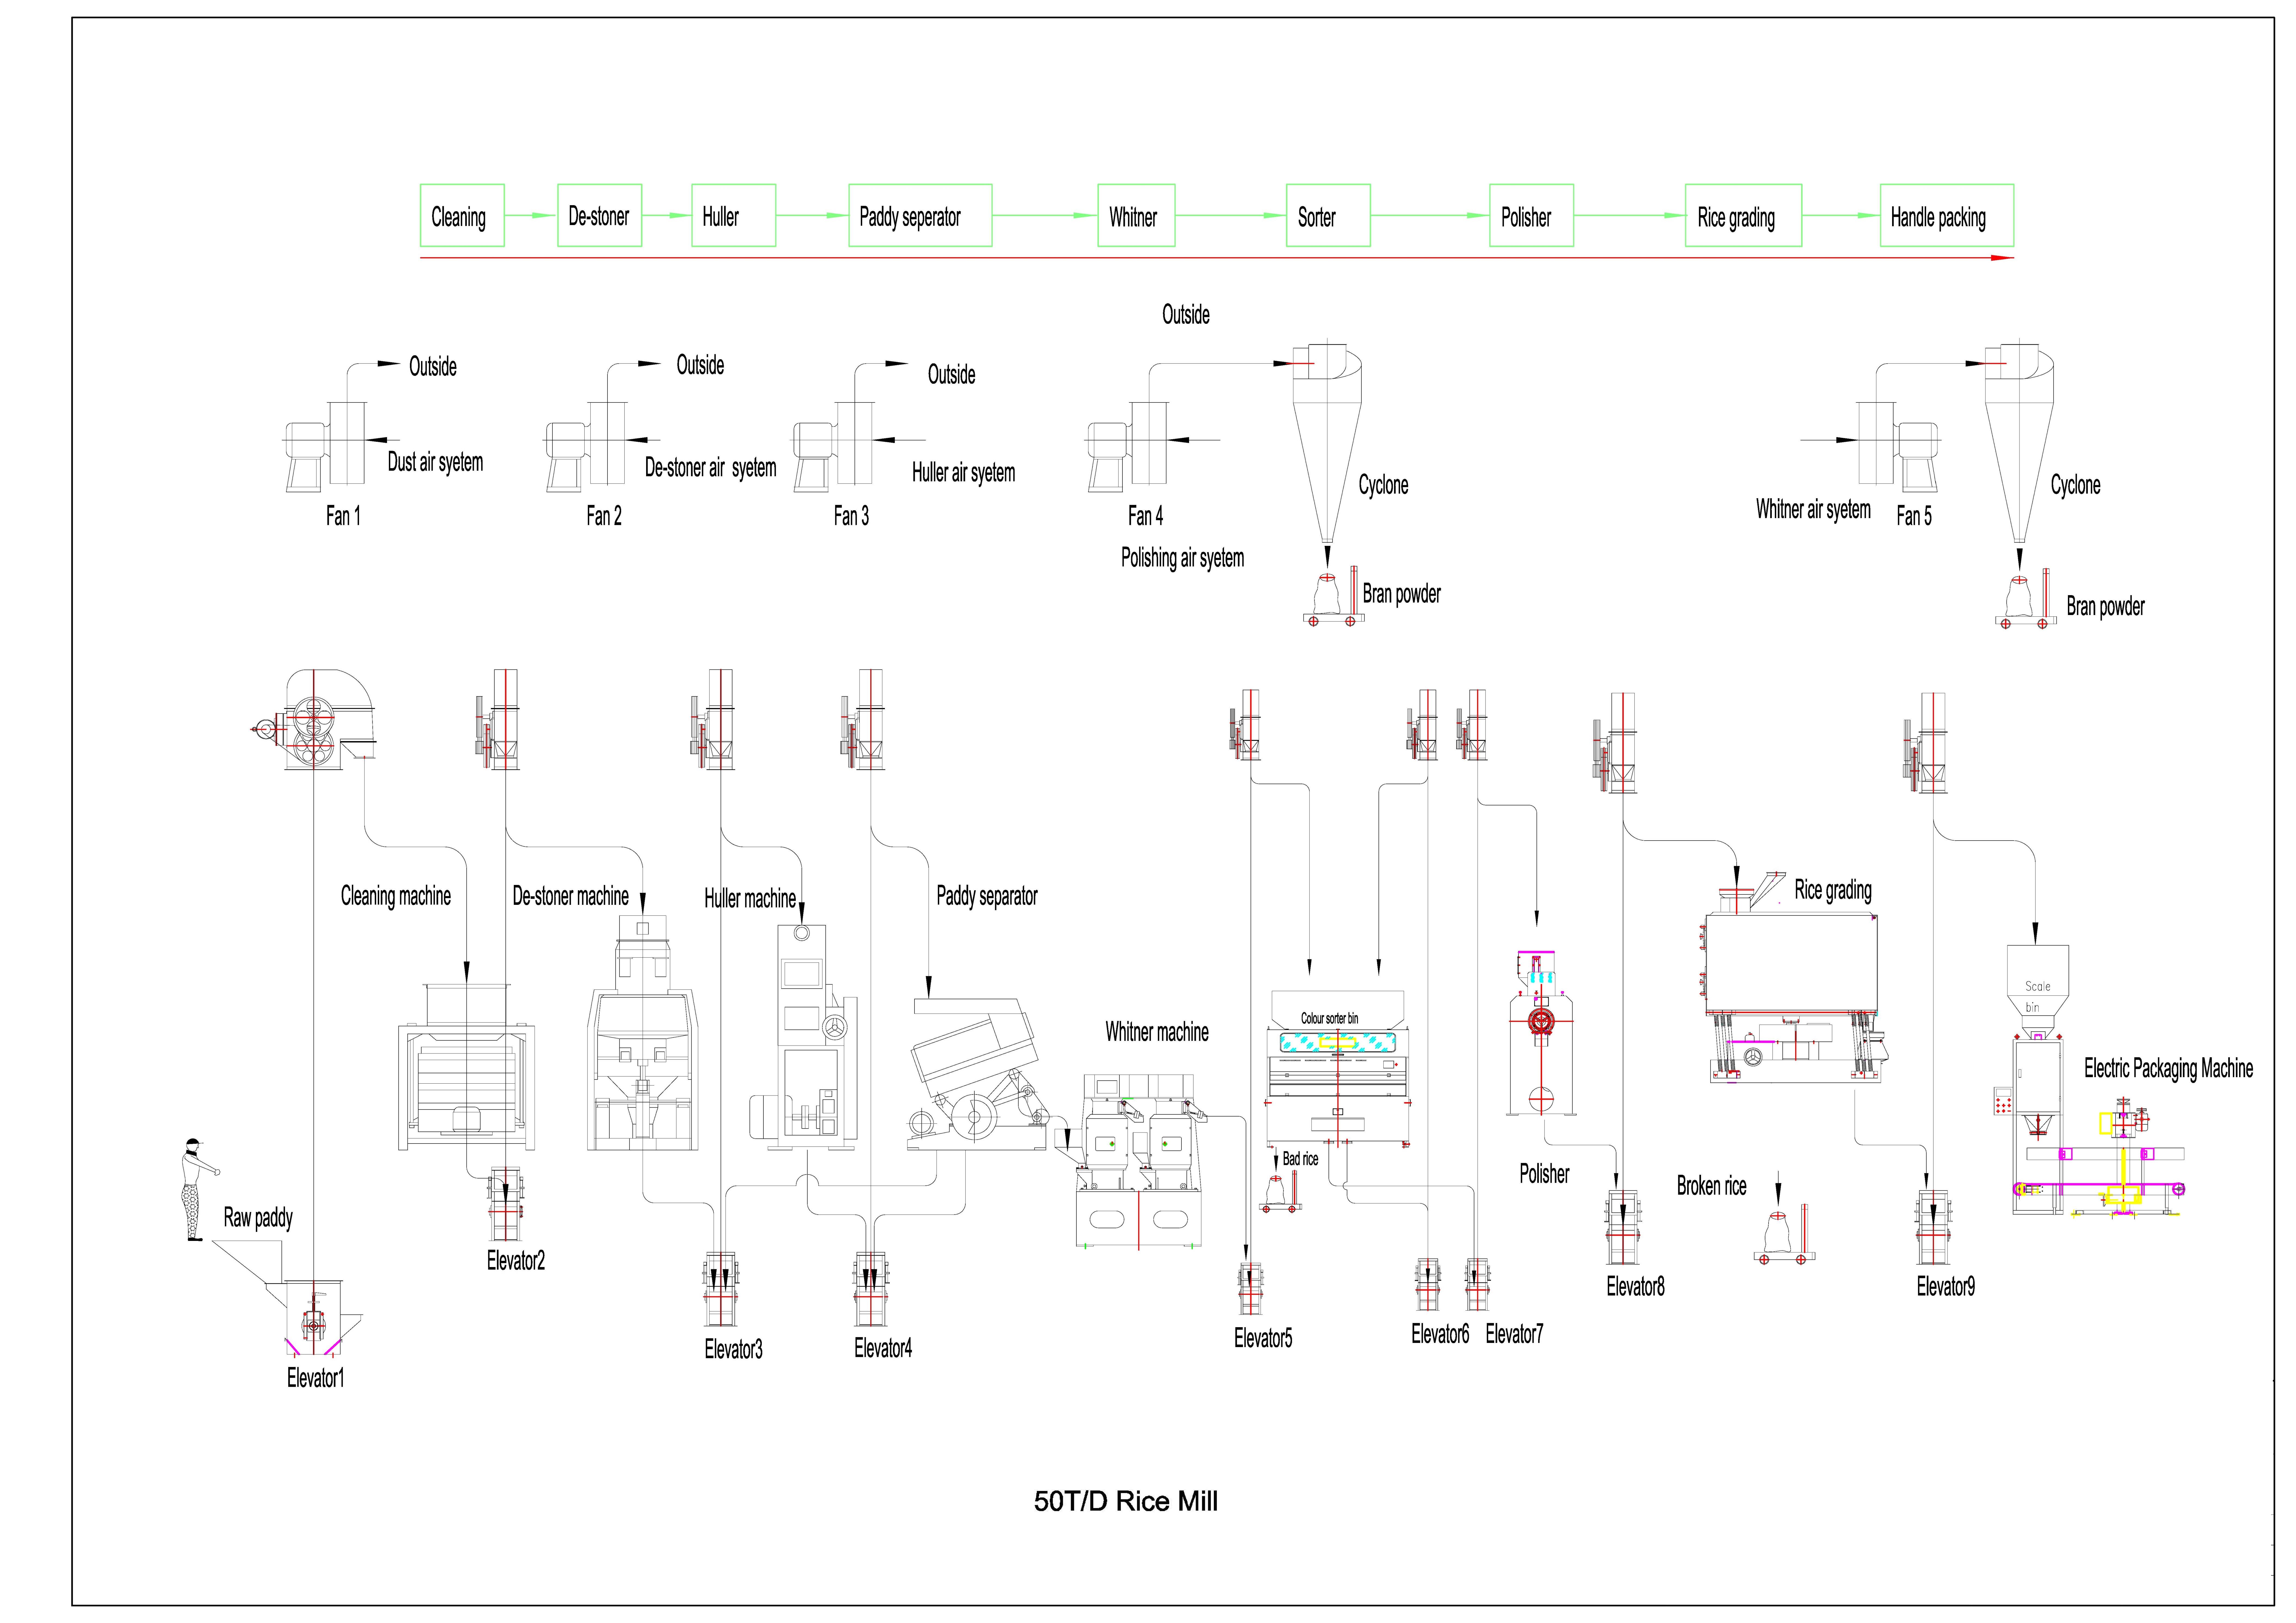 flowsheet-2t rice mill - 副本